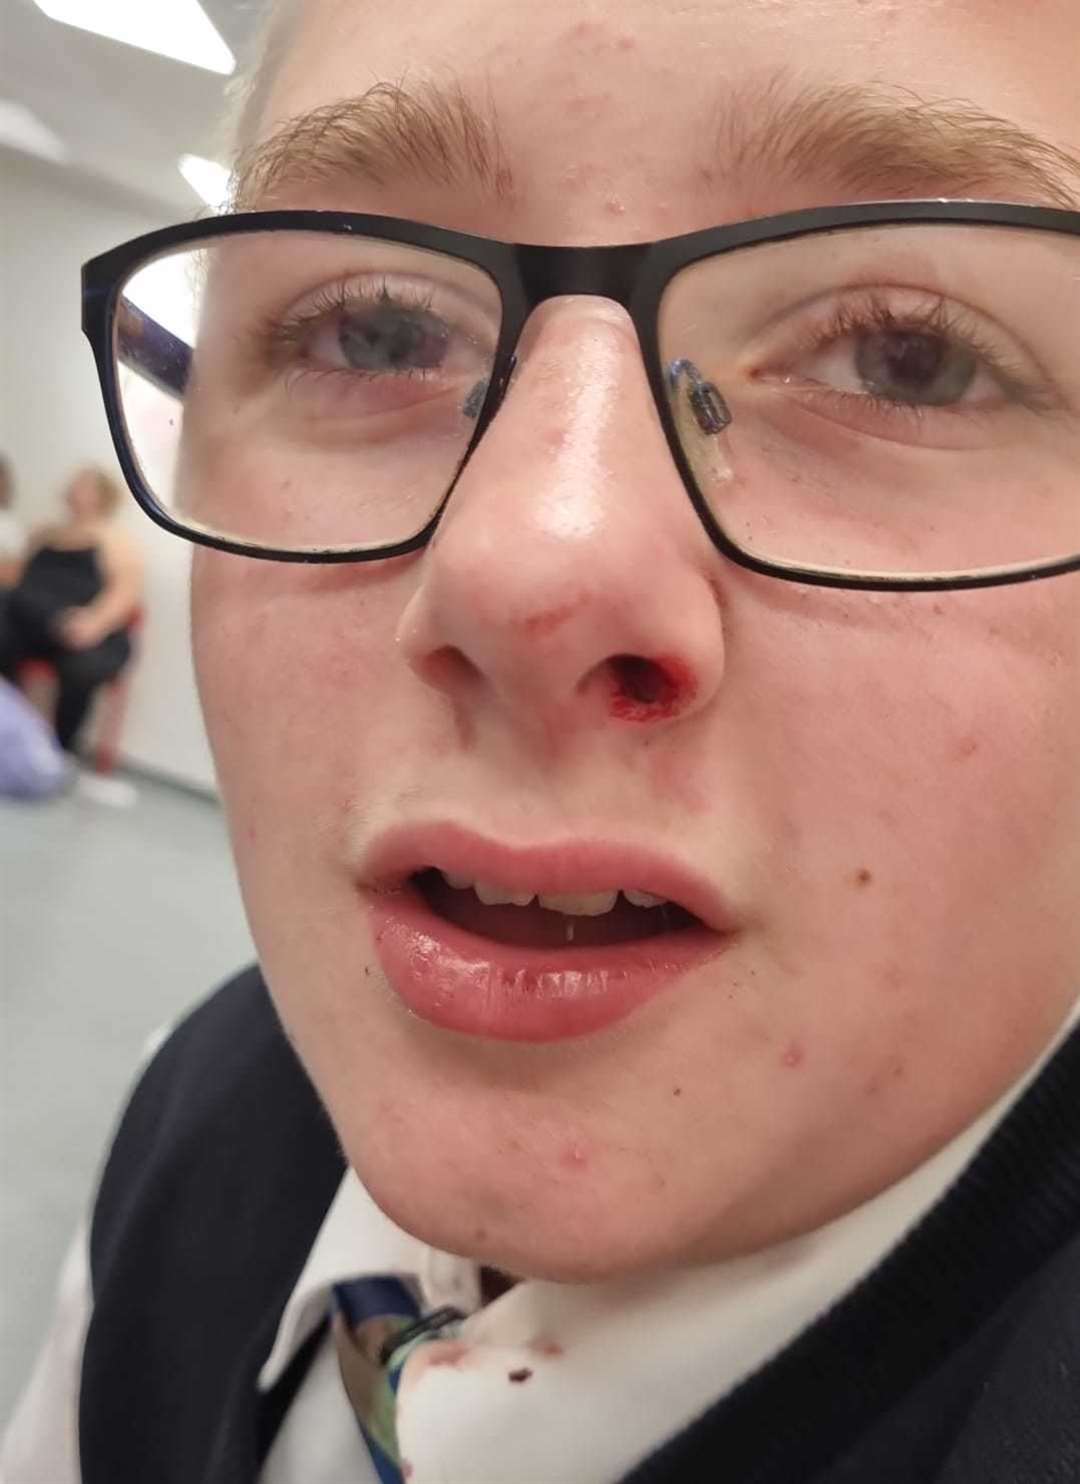 Aidan was punched in the face at Brompton Academy. Picture: Stephanie Parsons